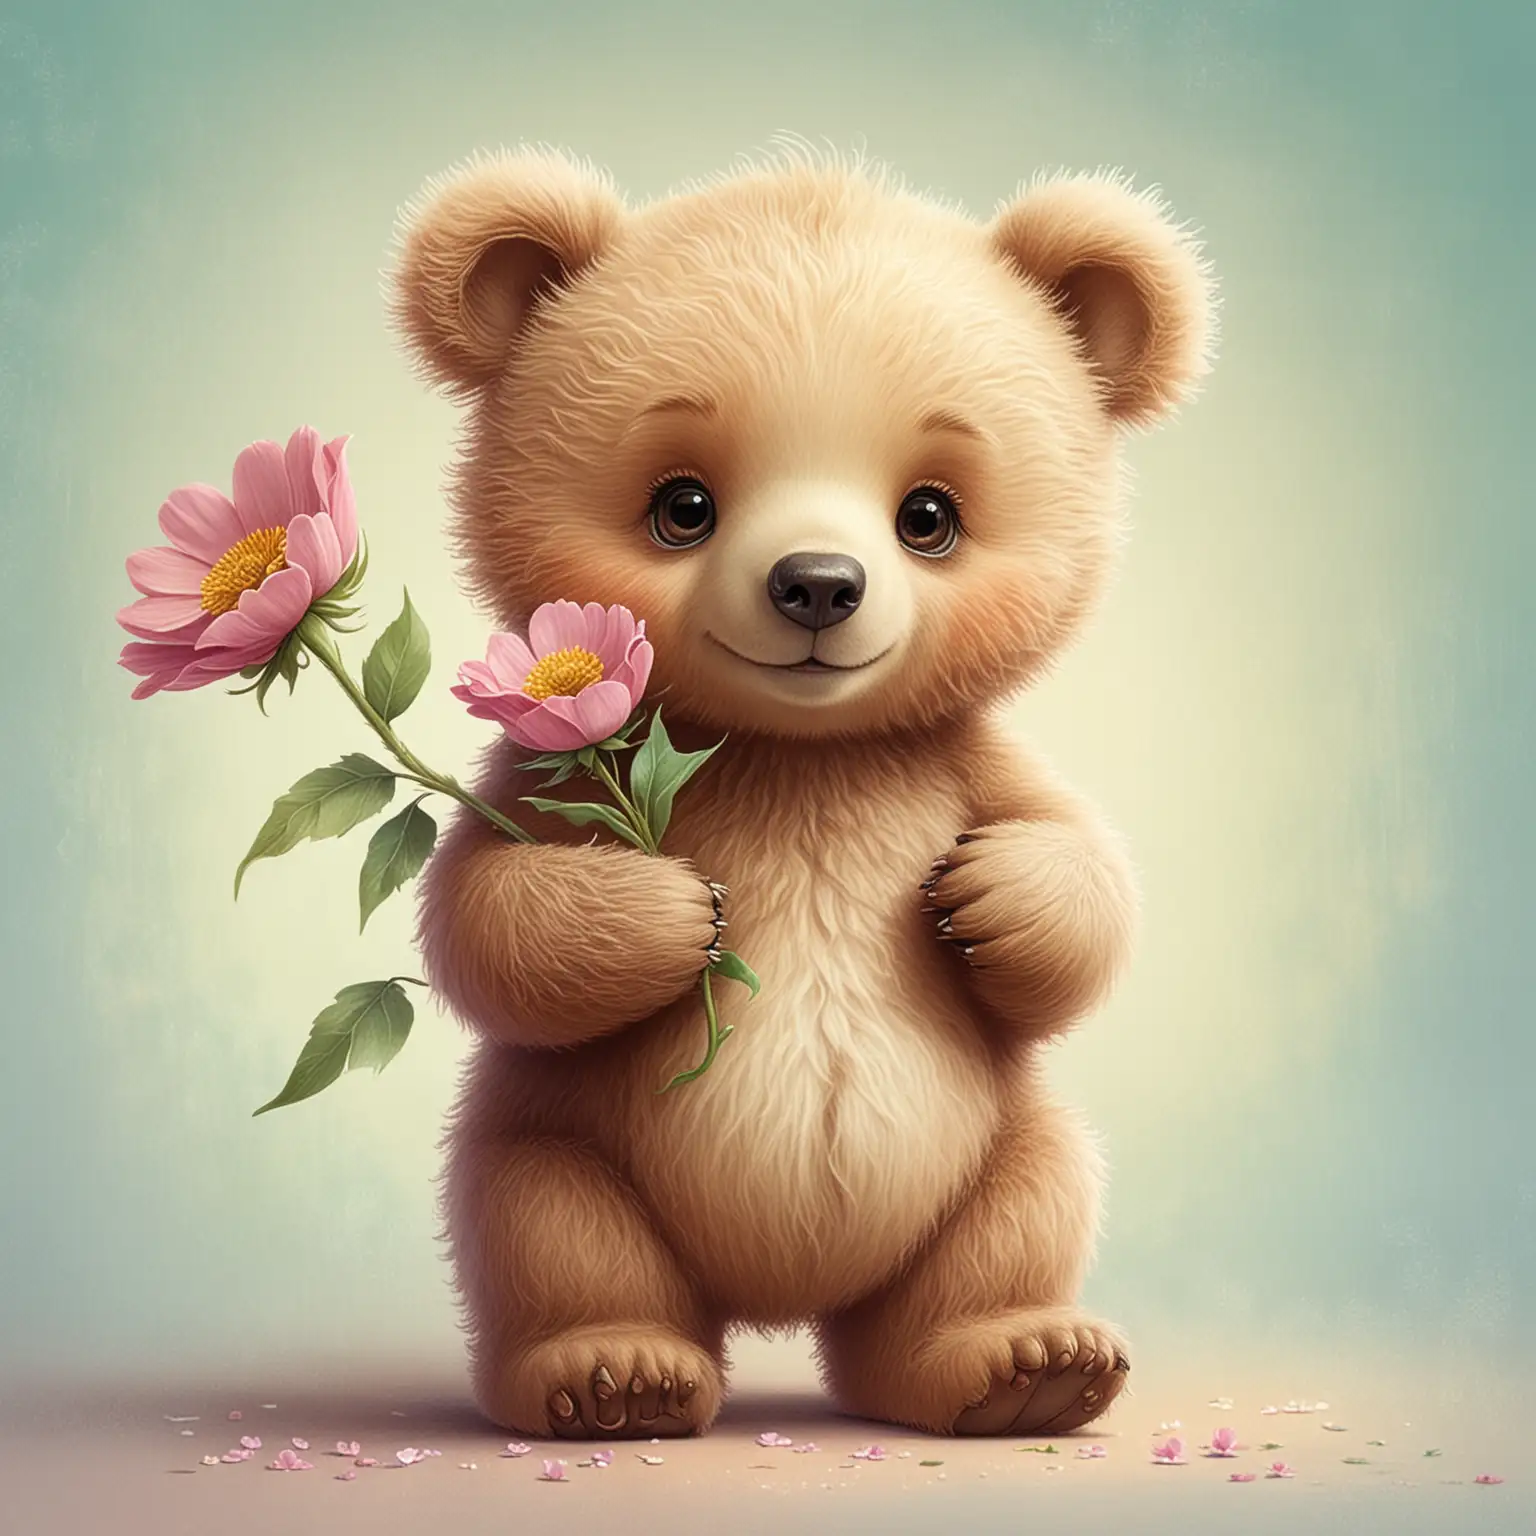  whimsical, fairytale, cartoon baby bear holding a flower, use soft pastels,,  The background should be transparent.